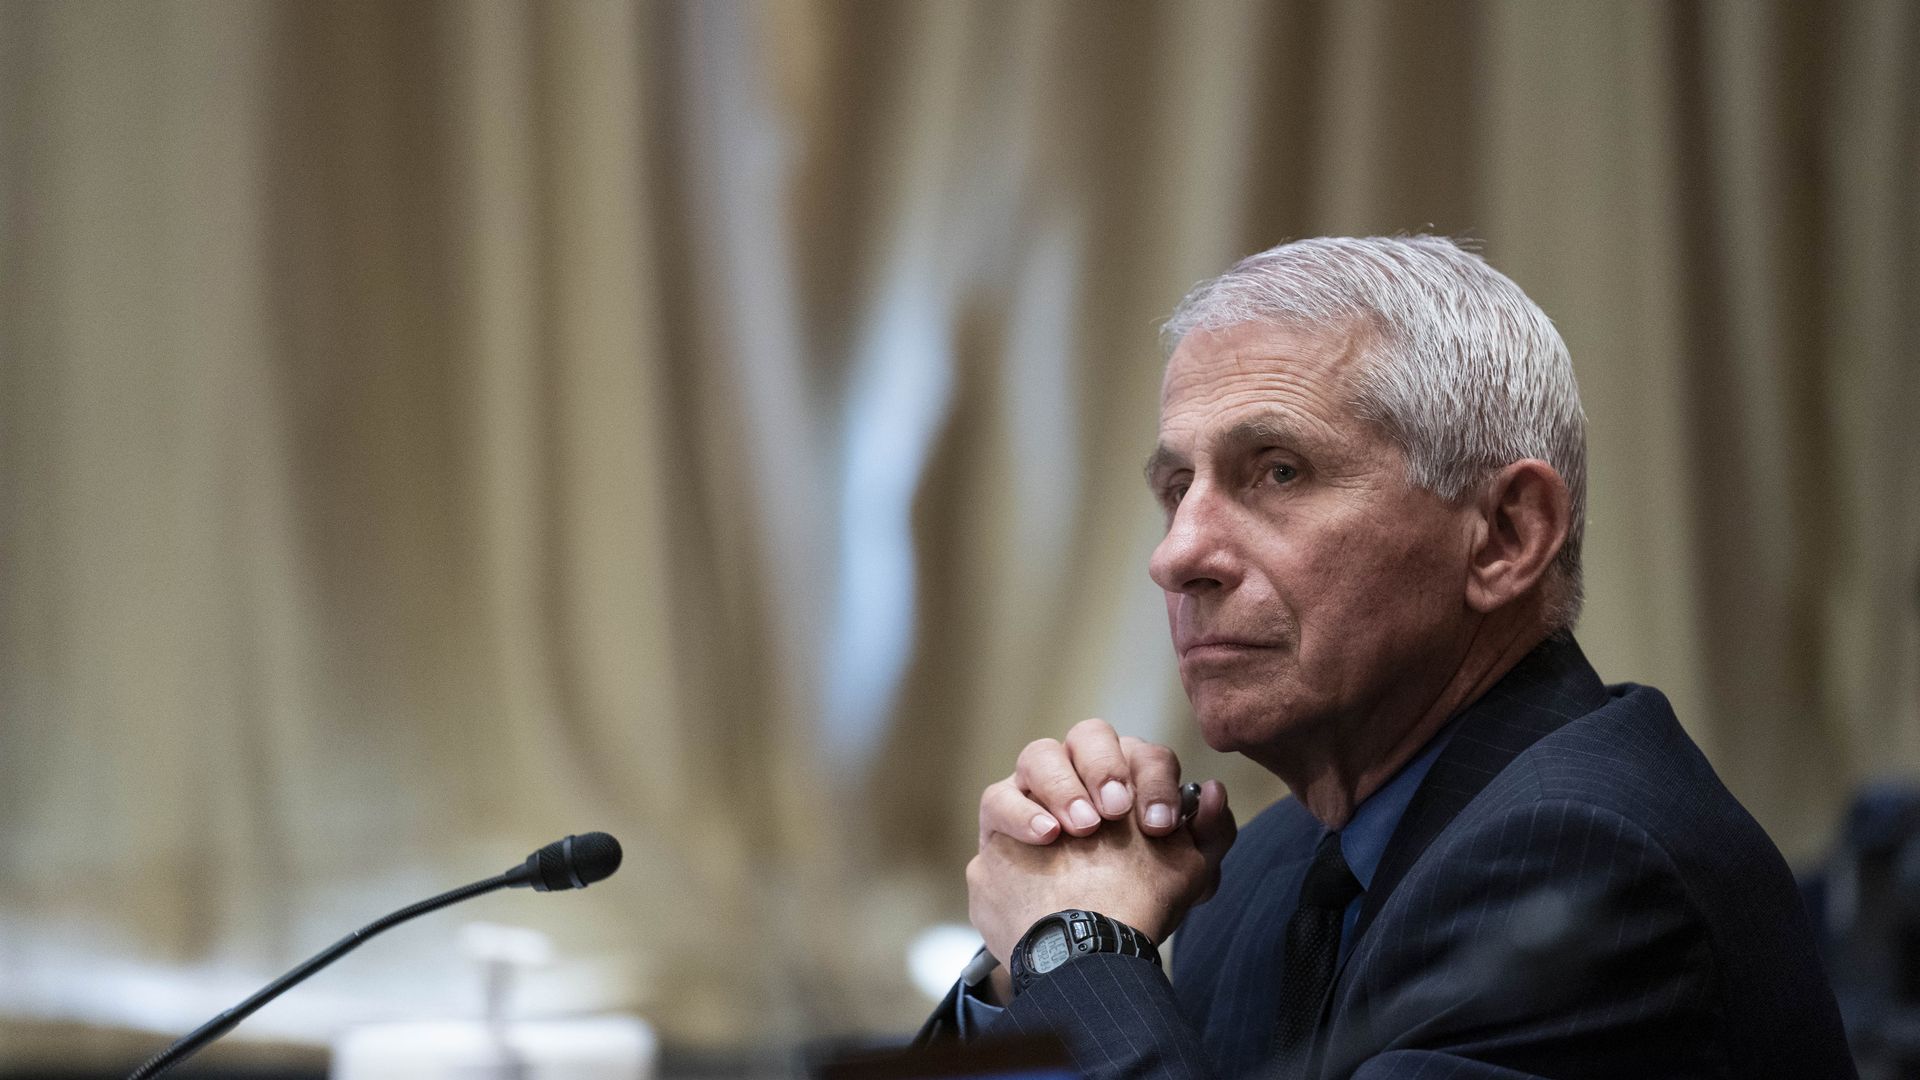 NIAID director Anthony Fauci looking serious at a congressional hearing on COVID-19